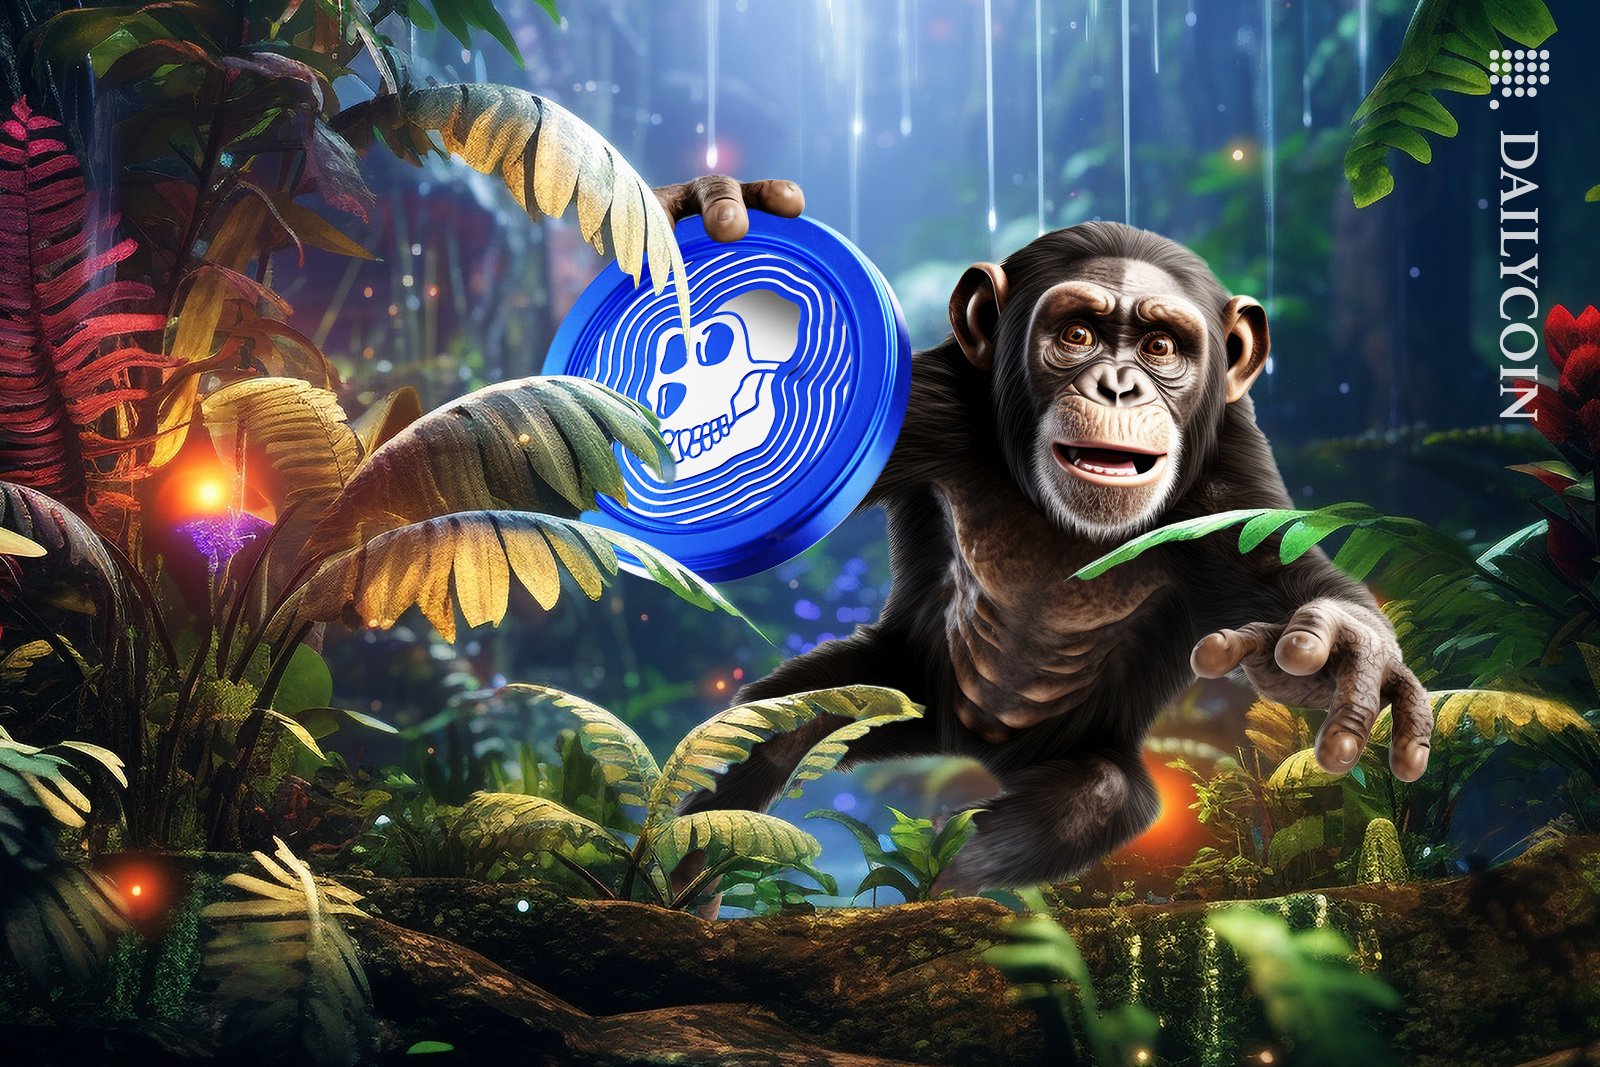 Ape with an APECOIN in hand jumping through the magic jungle.